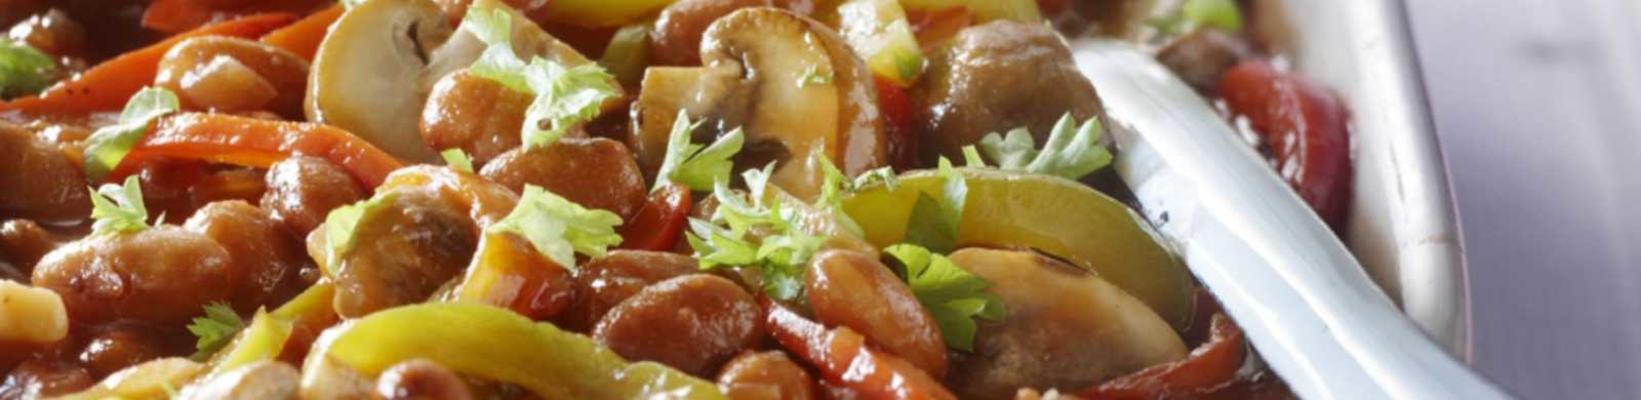 kidney beans with paprika and mushrooms